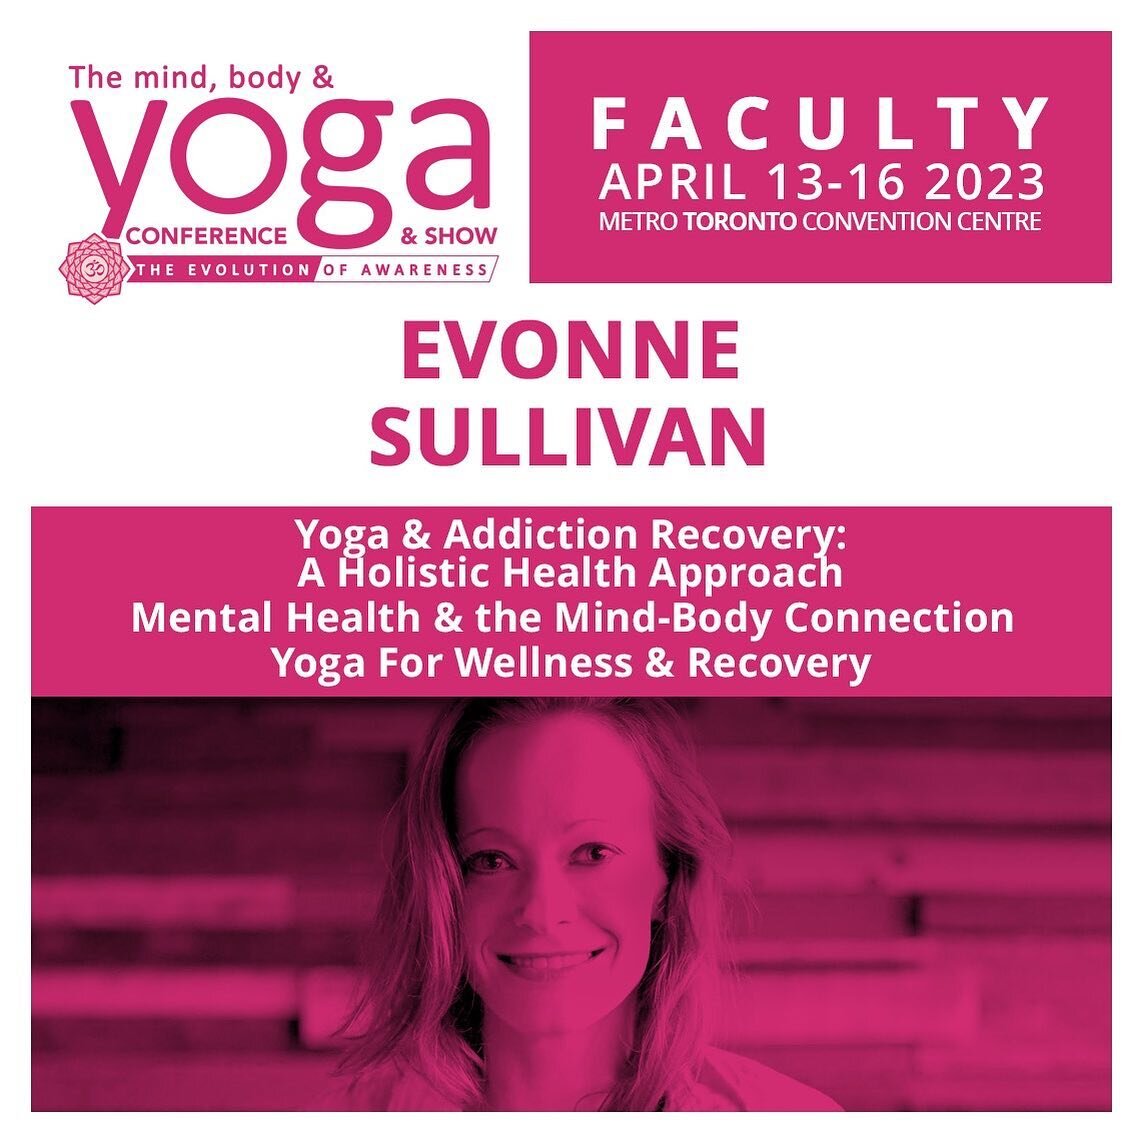 The Toronto Yoga Conference &amp; Show is back! This coming weekend, April 13 - 16, @yogaconference @mtcc_events 

I&rsquo;m looking forward to presenting workshops focused on mental health &amp; addiction recovery; combining specialized teachings &a